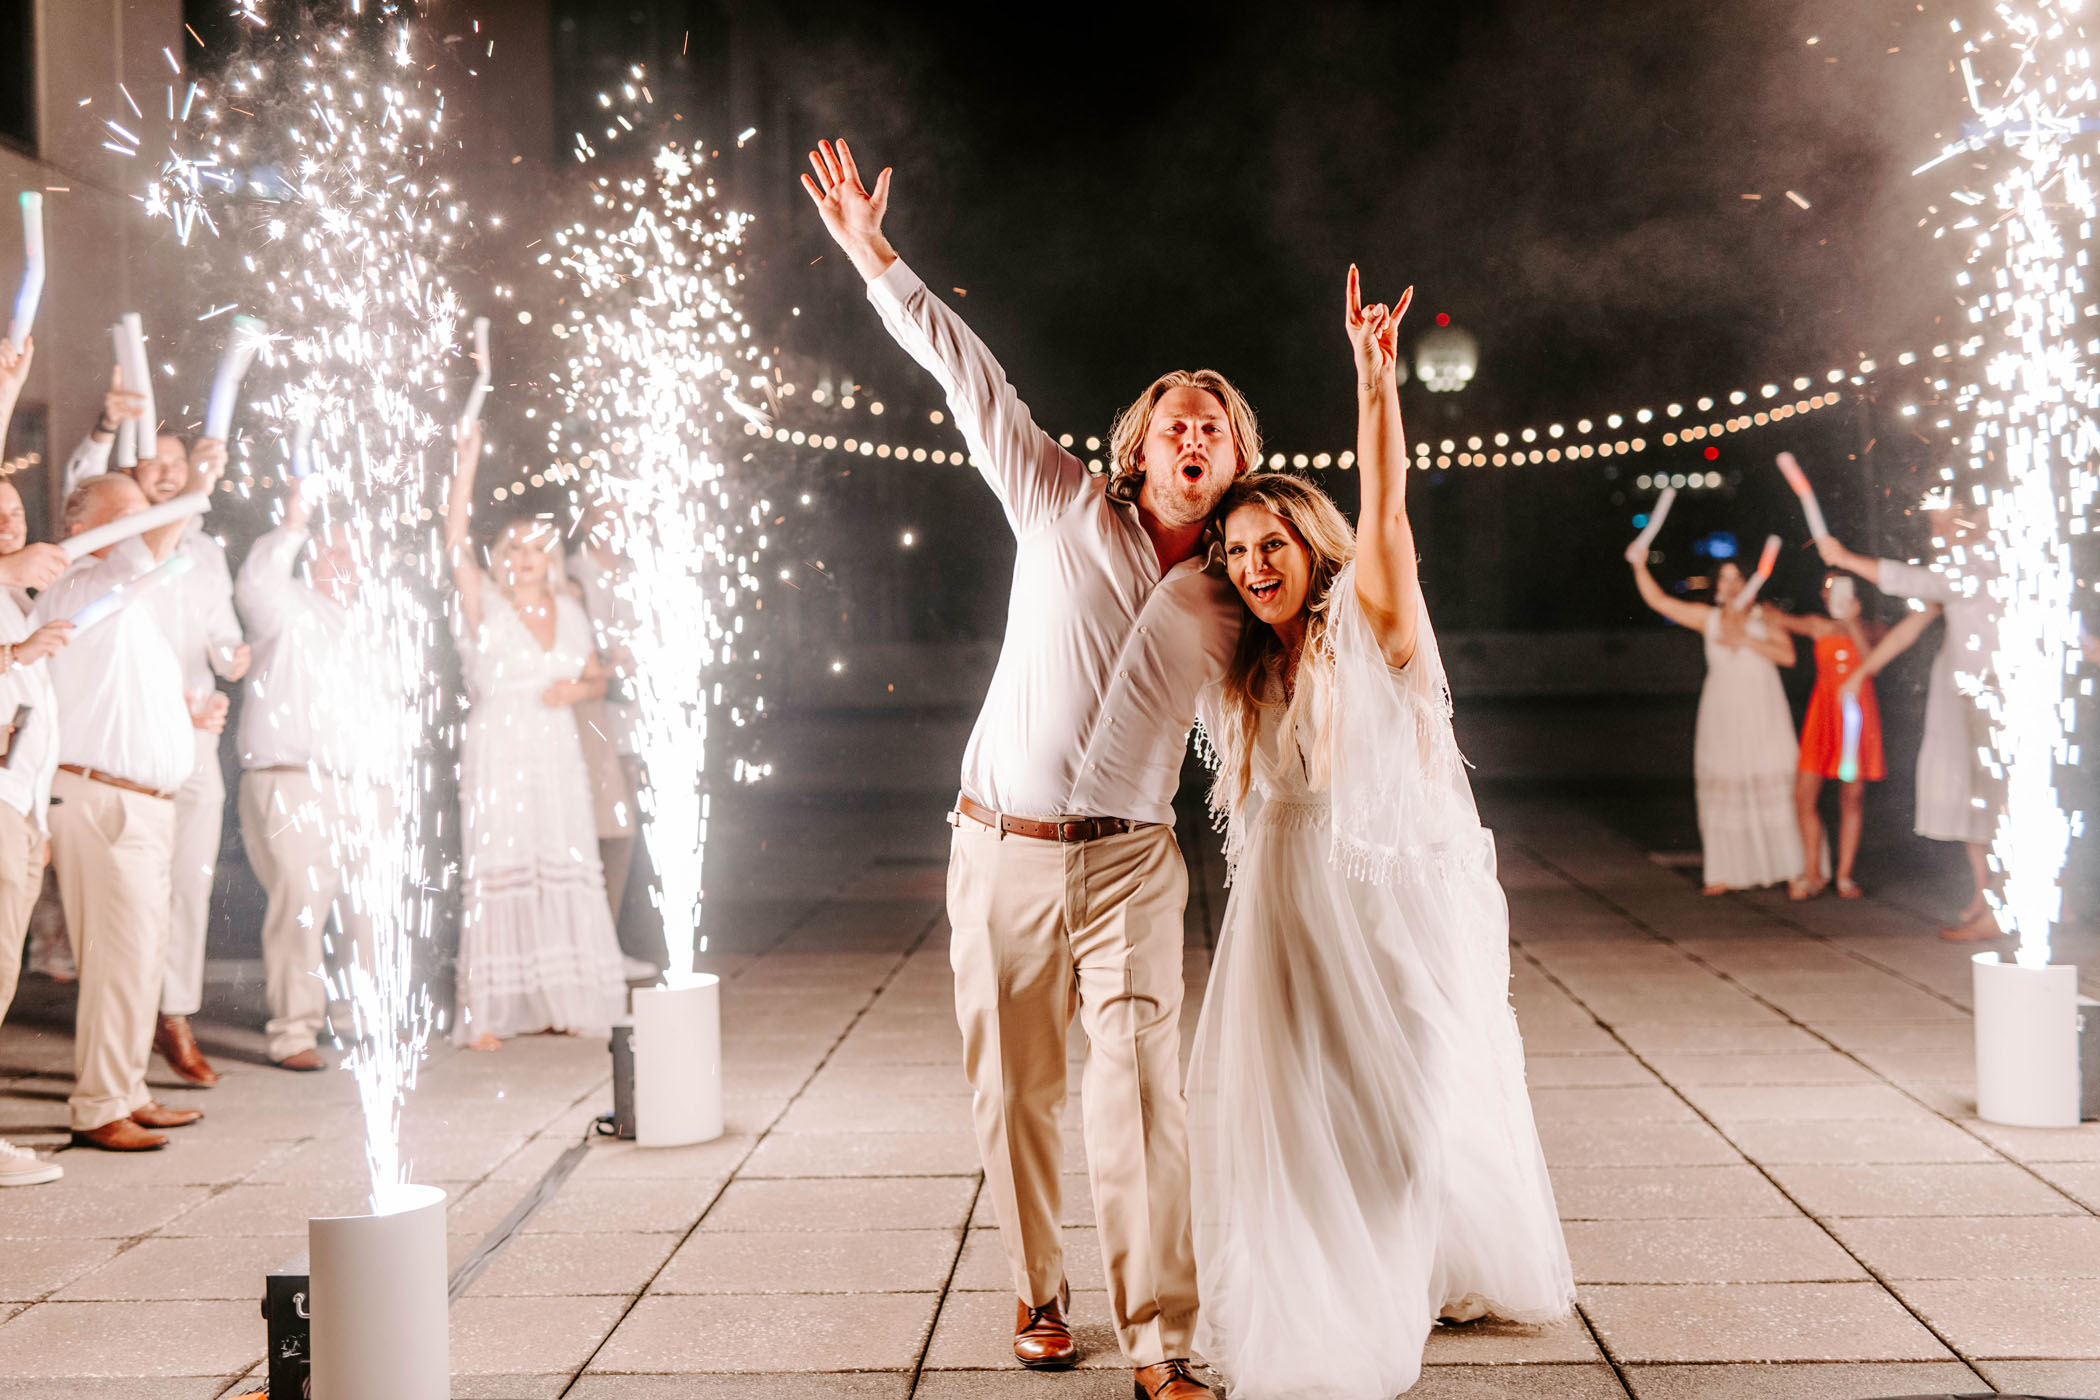 Bride and groom sparklers exit